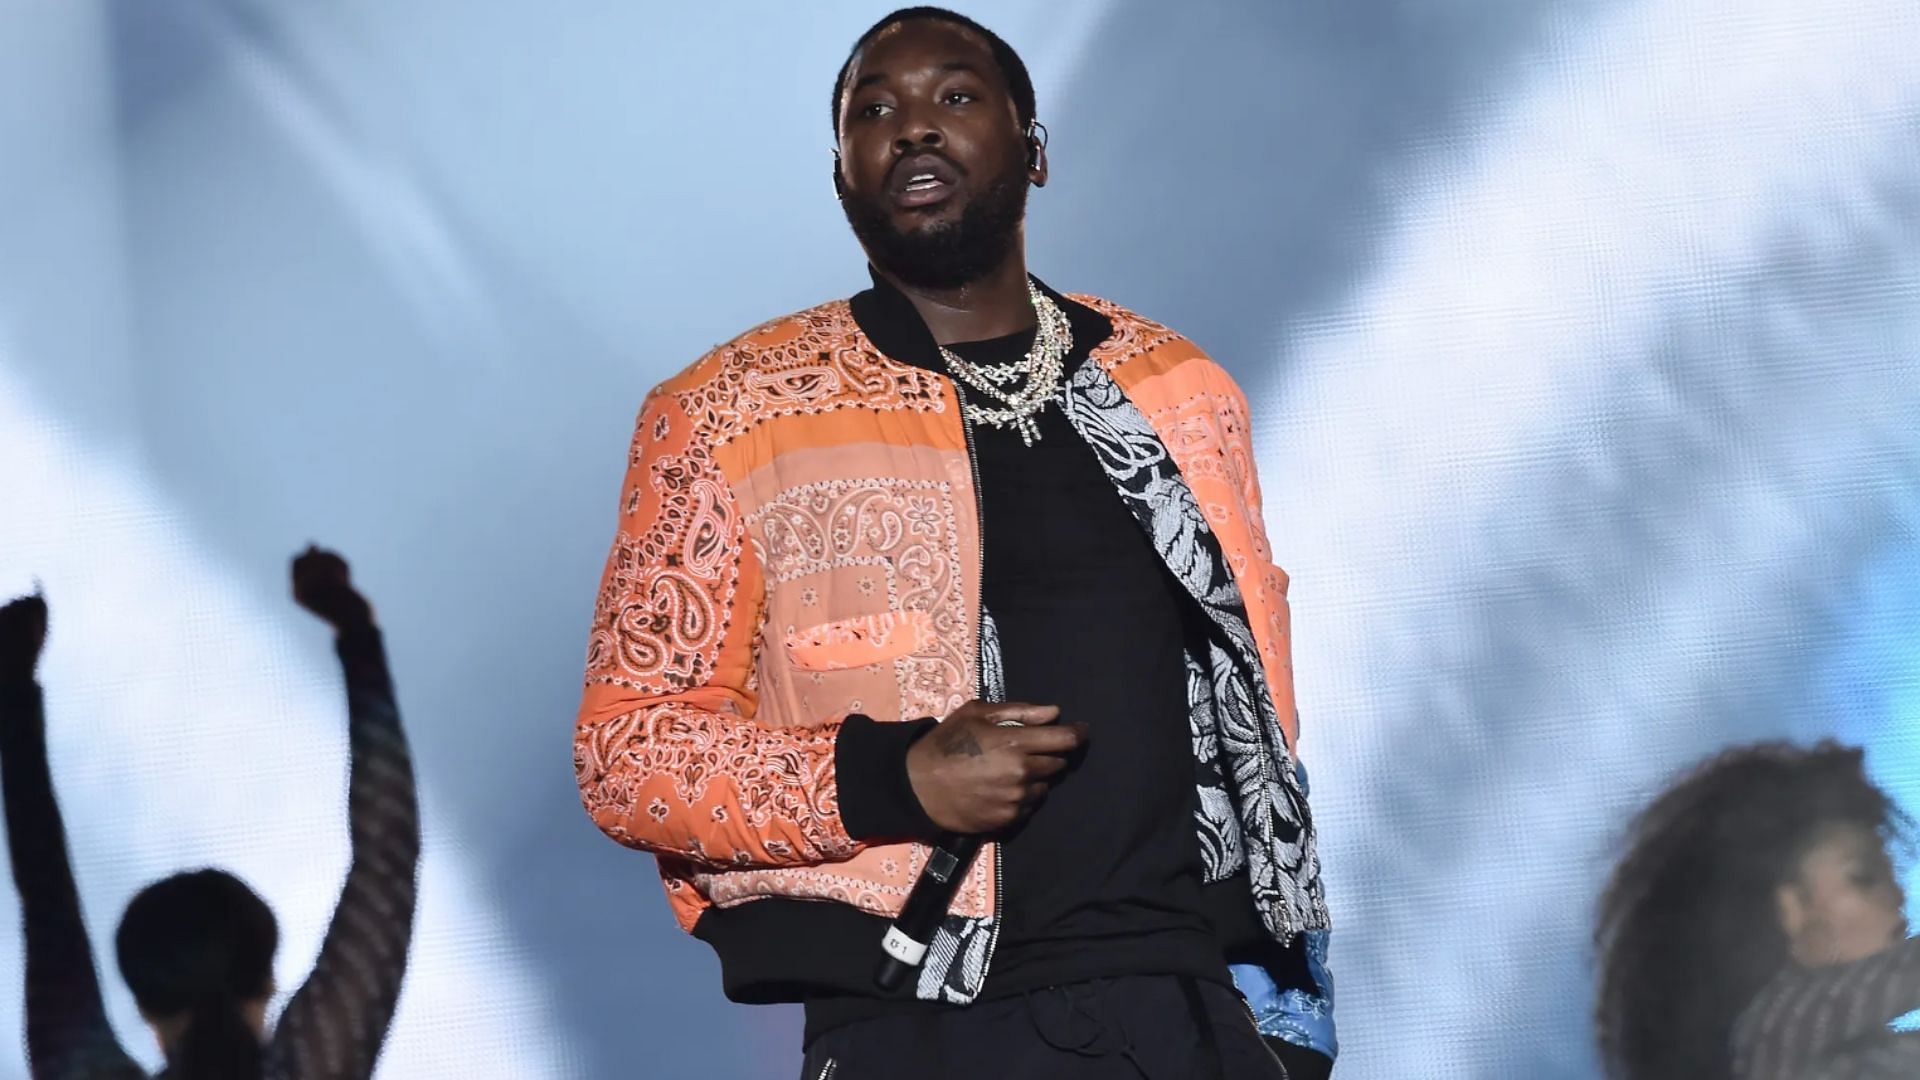 Meek Mill Wells Fargo center concert Tickets, where to buy, price and more